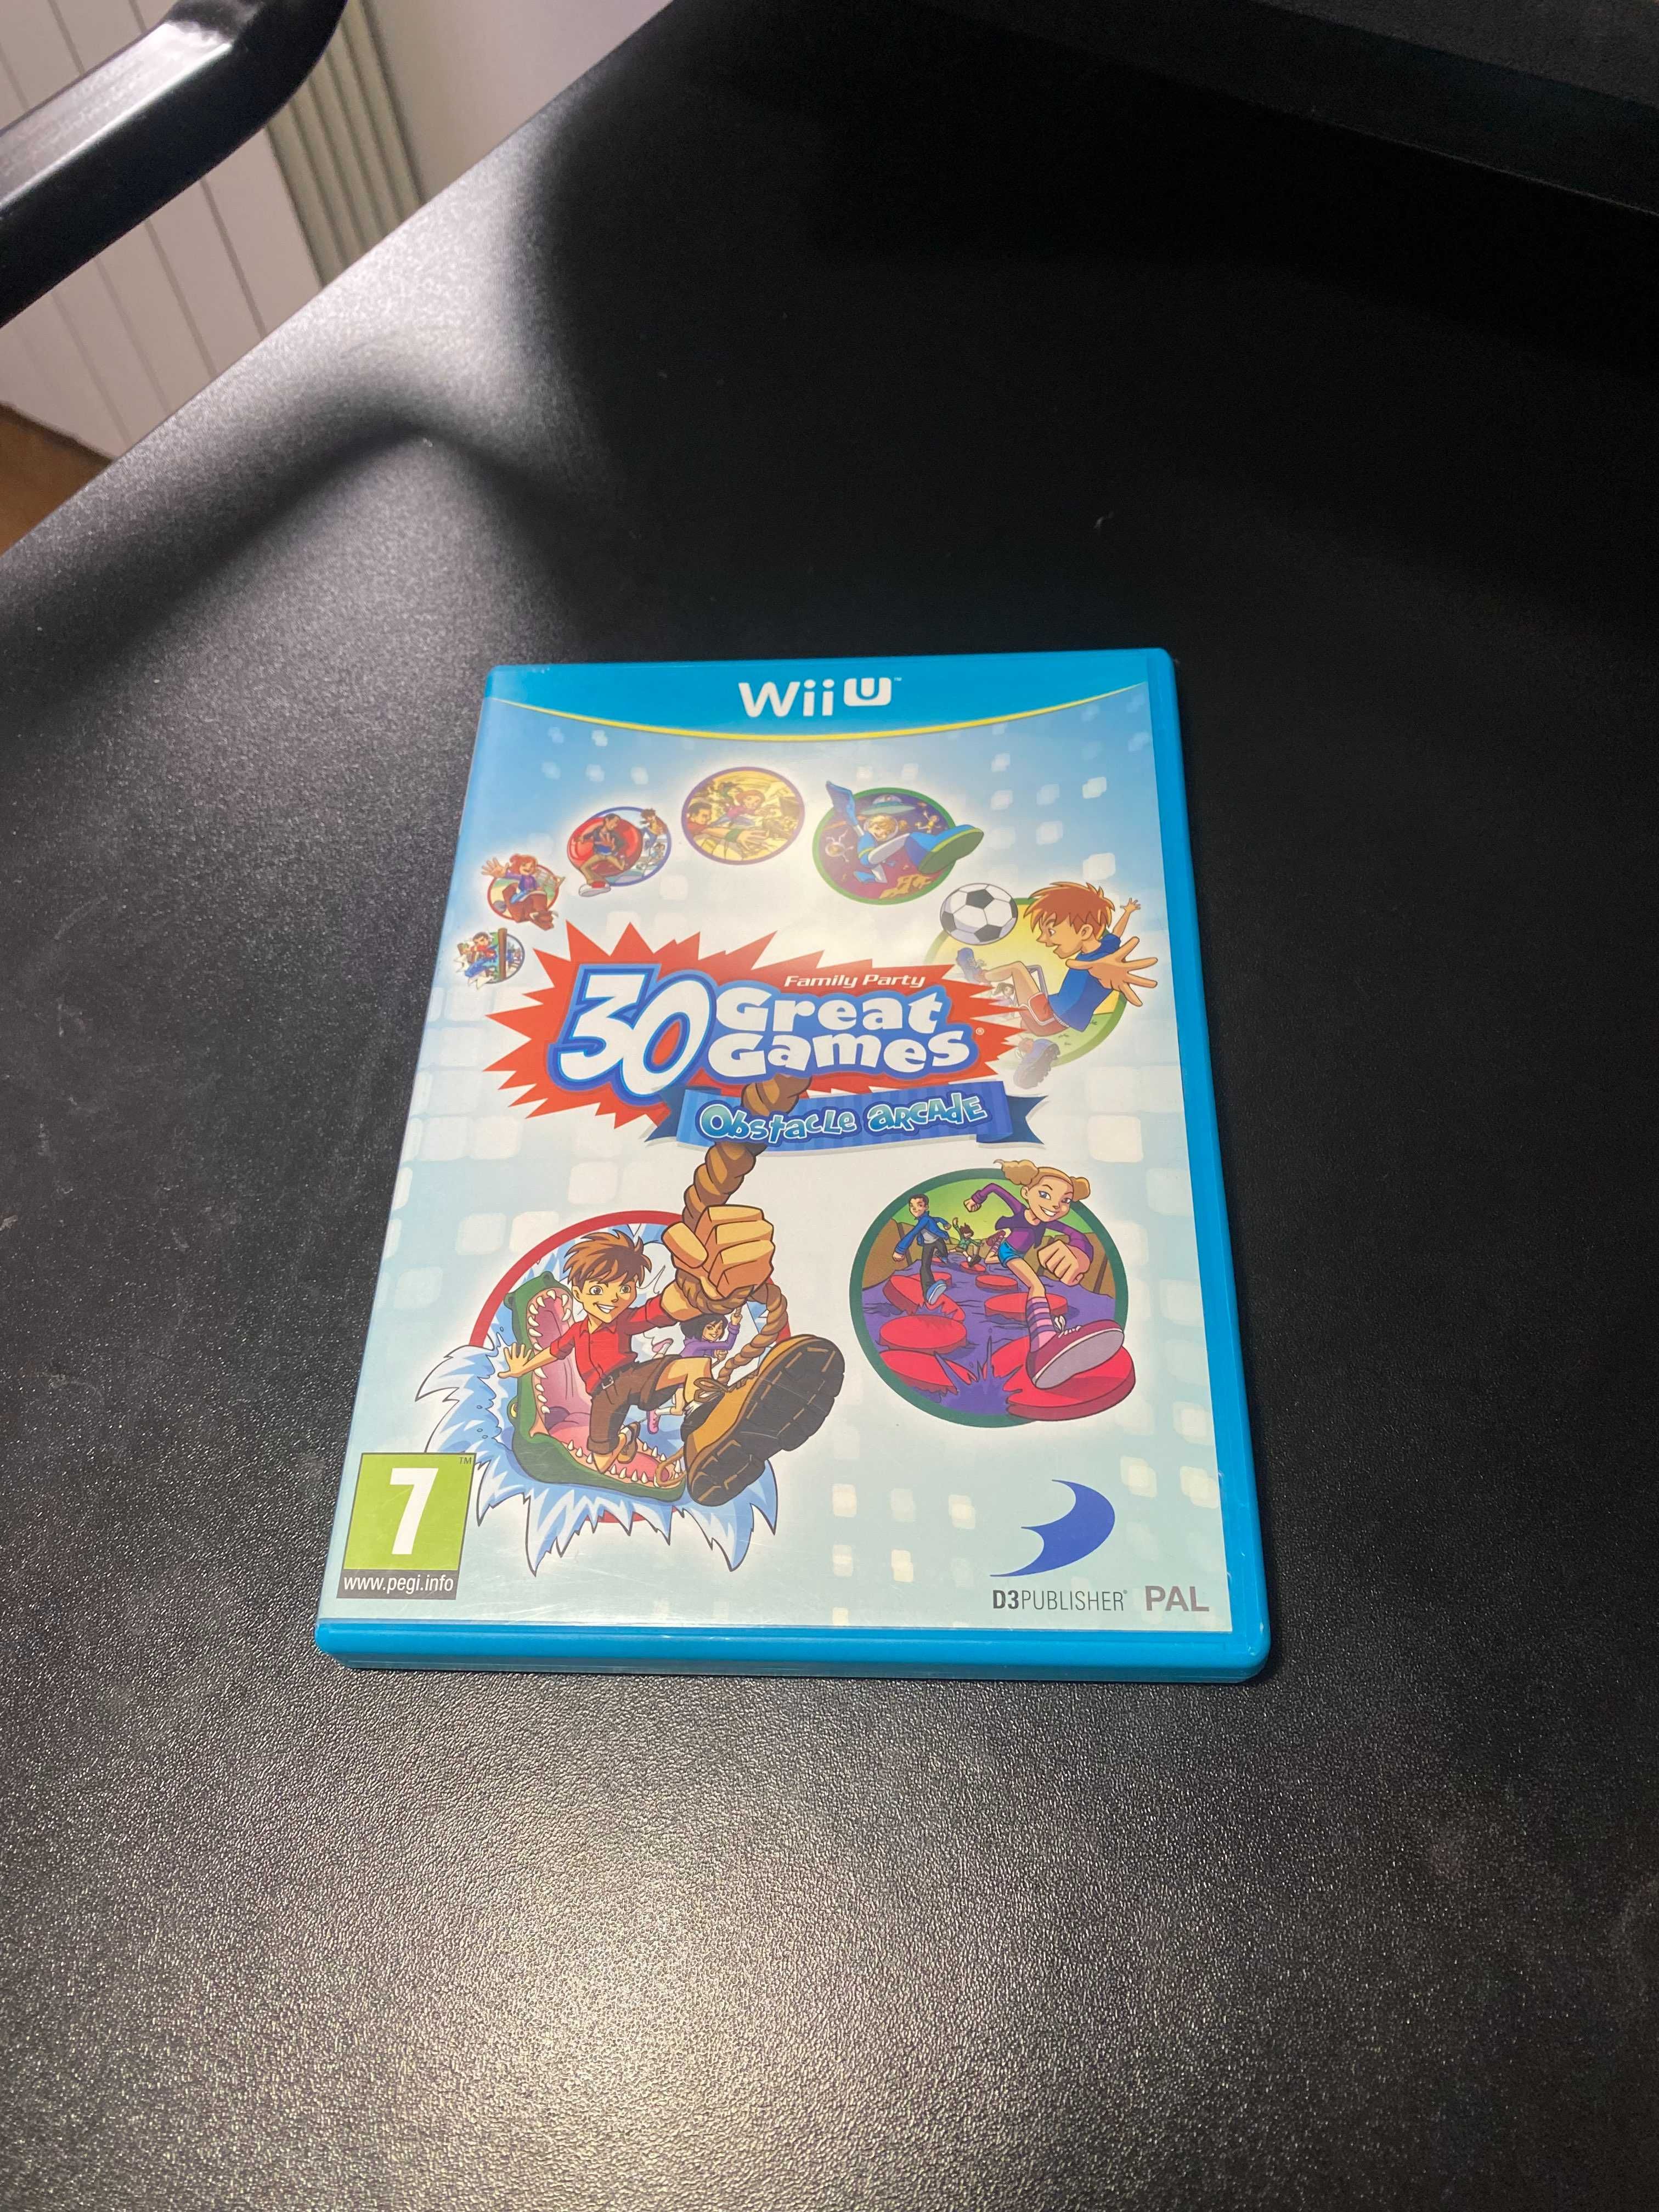 Nintendo Wii U Family Party: 30 Great Games Obstacle Arcade